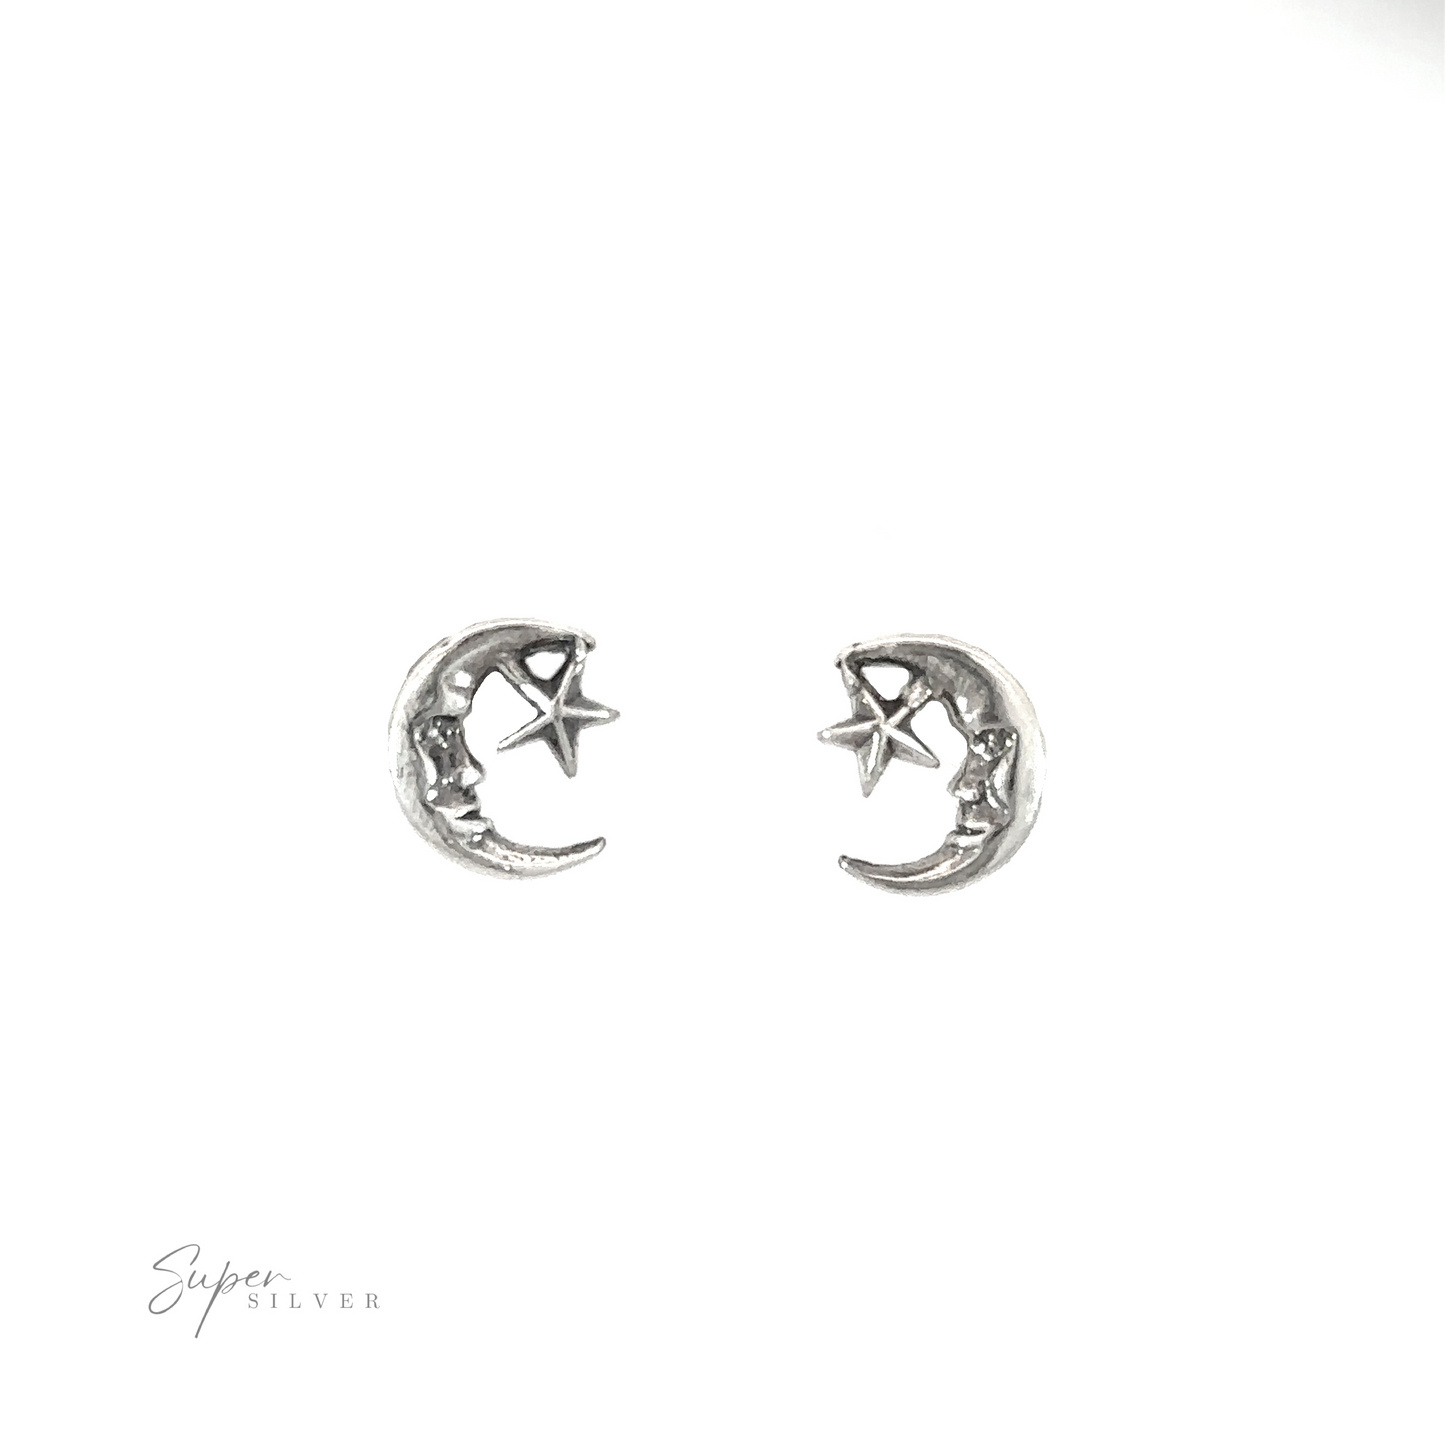 Charming celestial allure, these Moon and Star Studs are the perfect charming accessories with their silver crescent and star design.